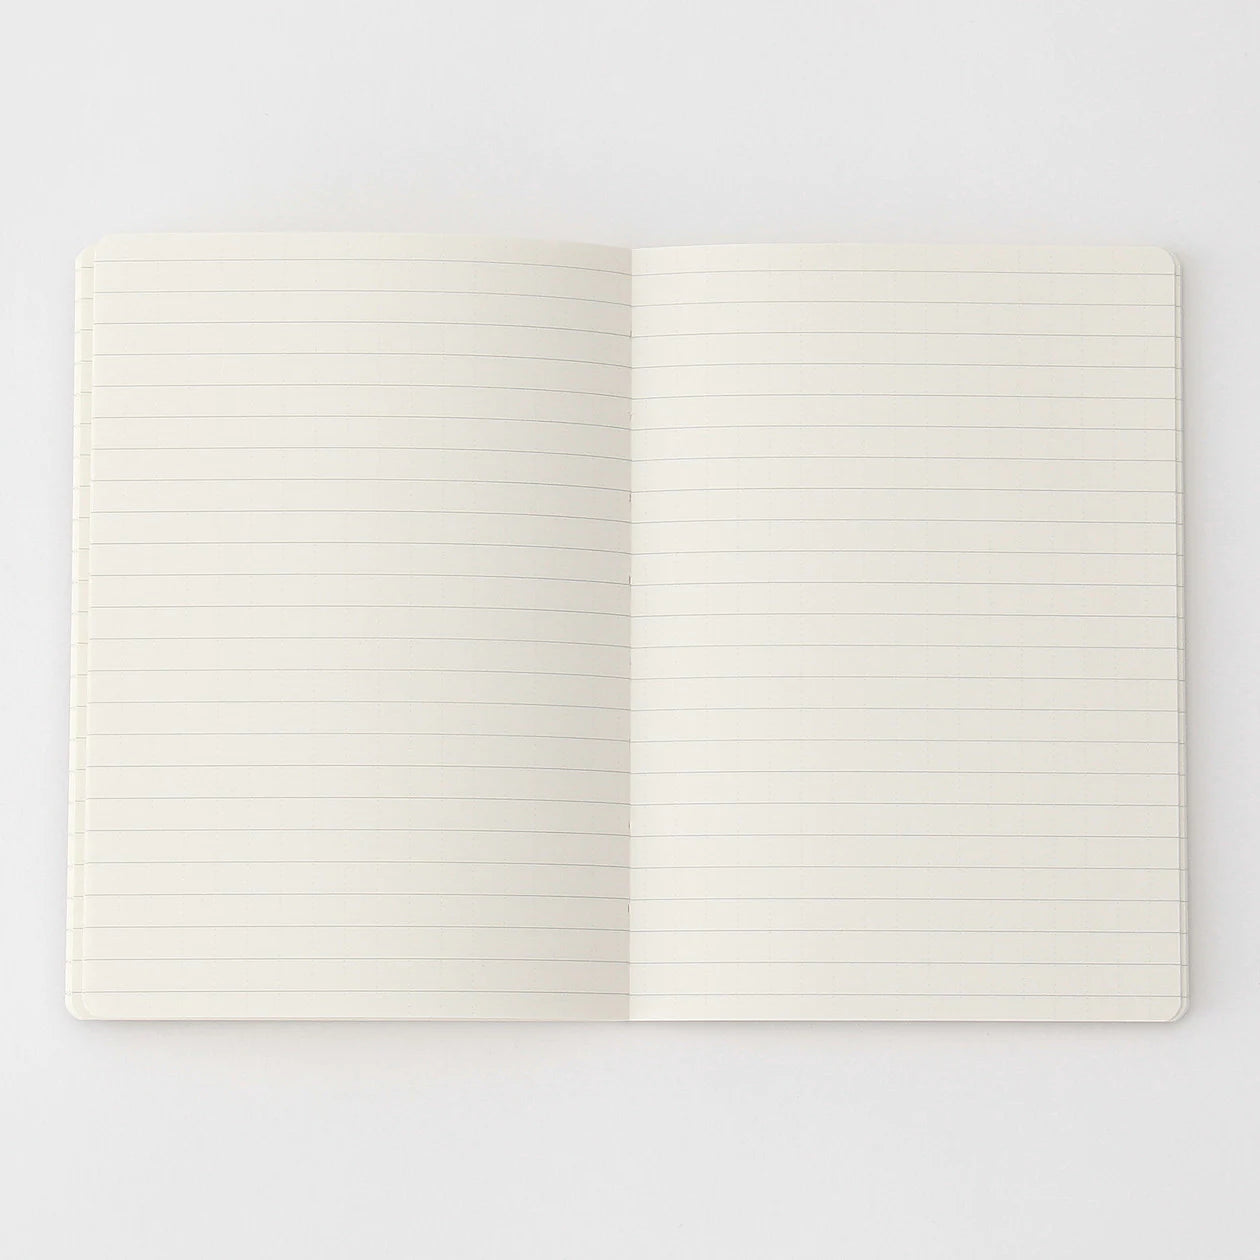 Unlined Notebook: Unruled Notebook, Non Lined, Large (8.5 x 11 inches) -  100 Blank Pages, Lineless Notebook / Journal for Adults, Men, Women,  Students